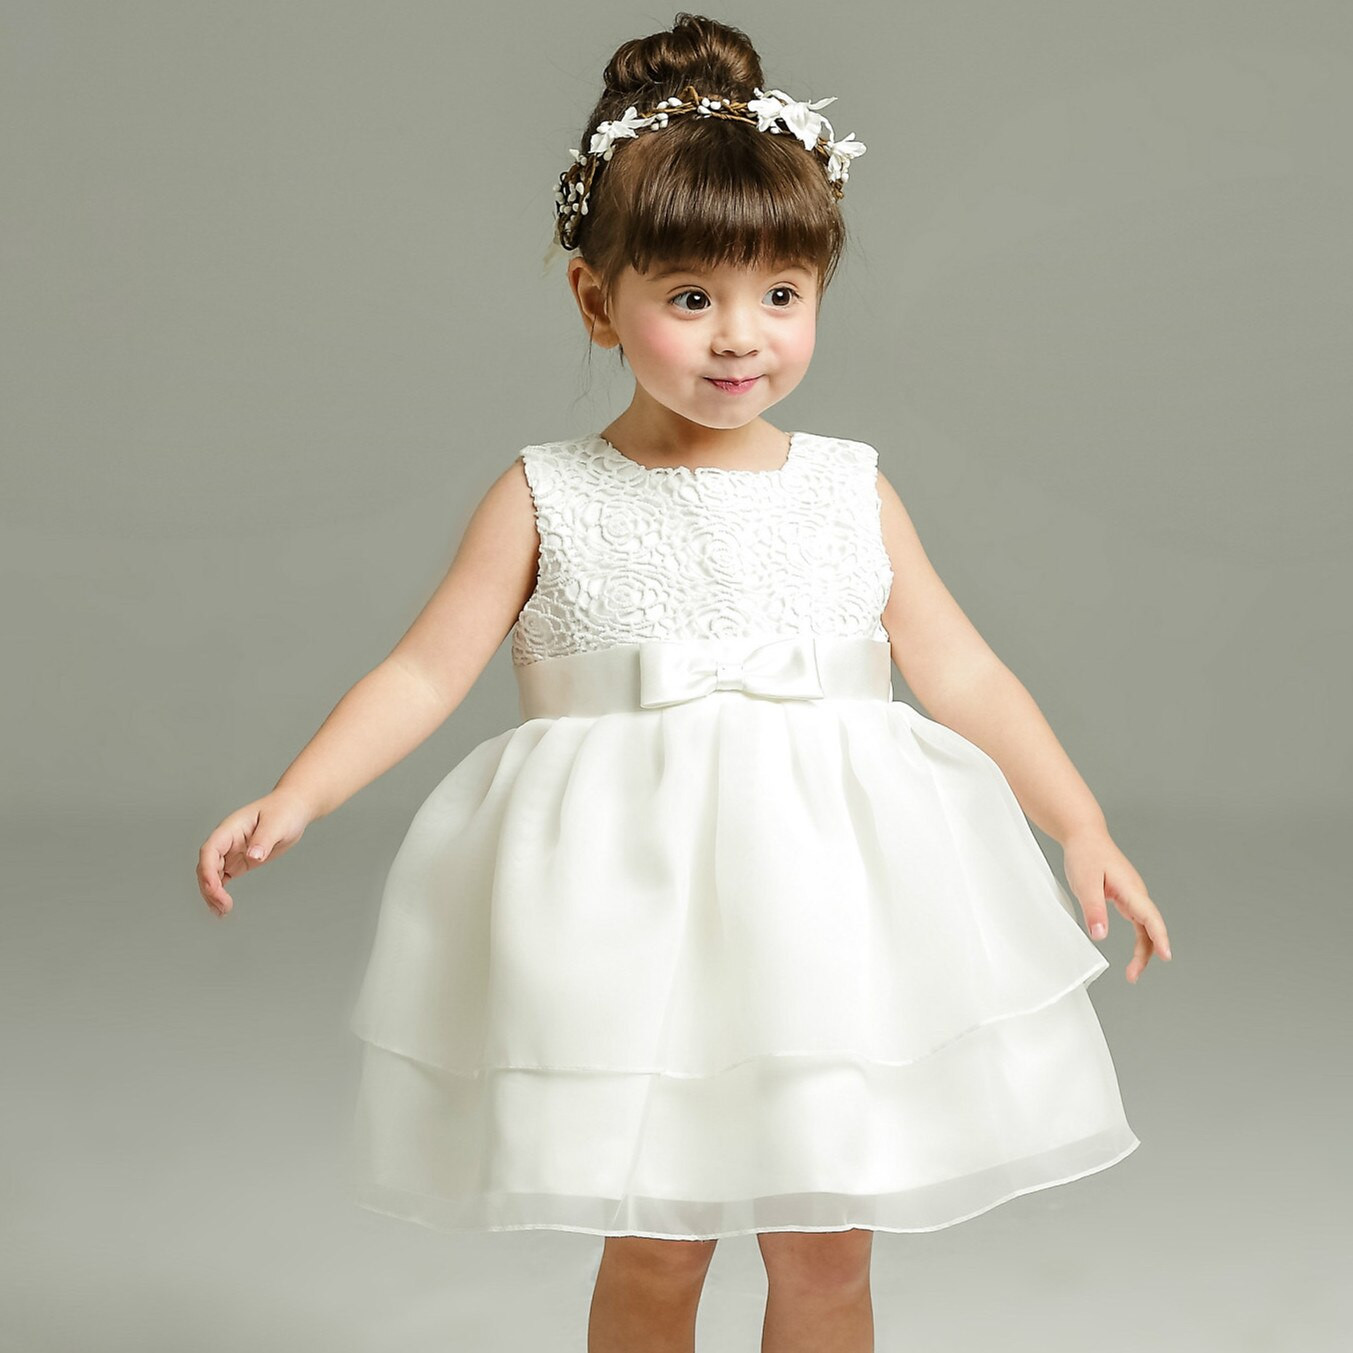 Party Dresses For 1 Year Old Baby Girl
 1 Year Old Baby Girl Dress Princess Wedding Birthday